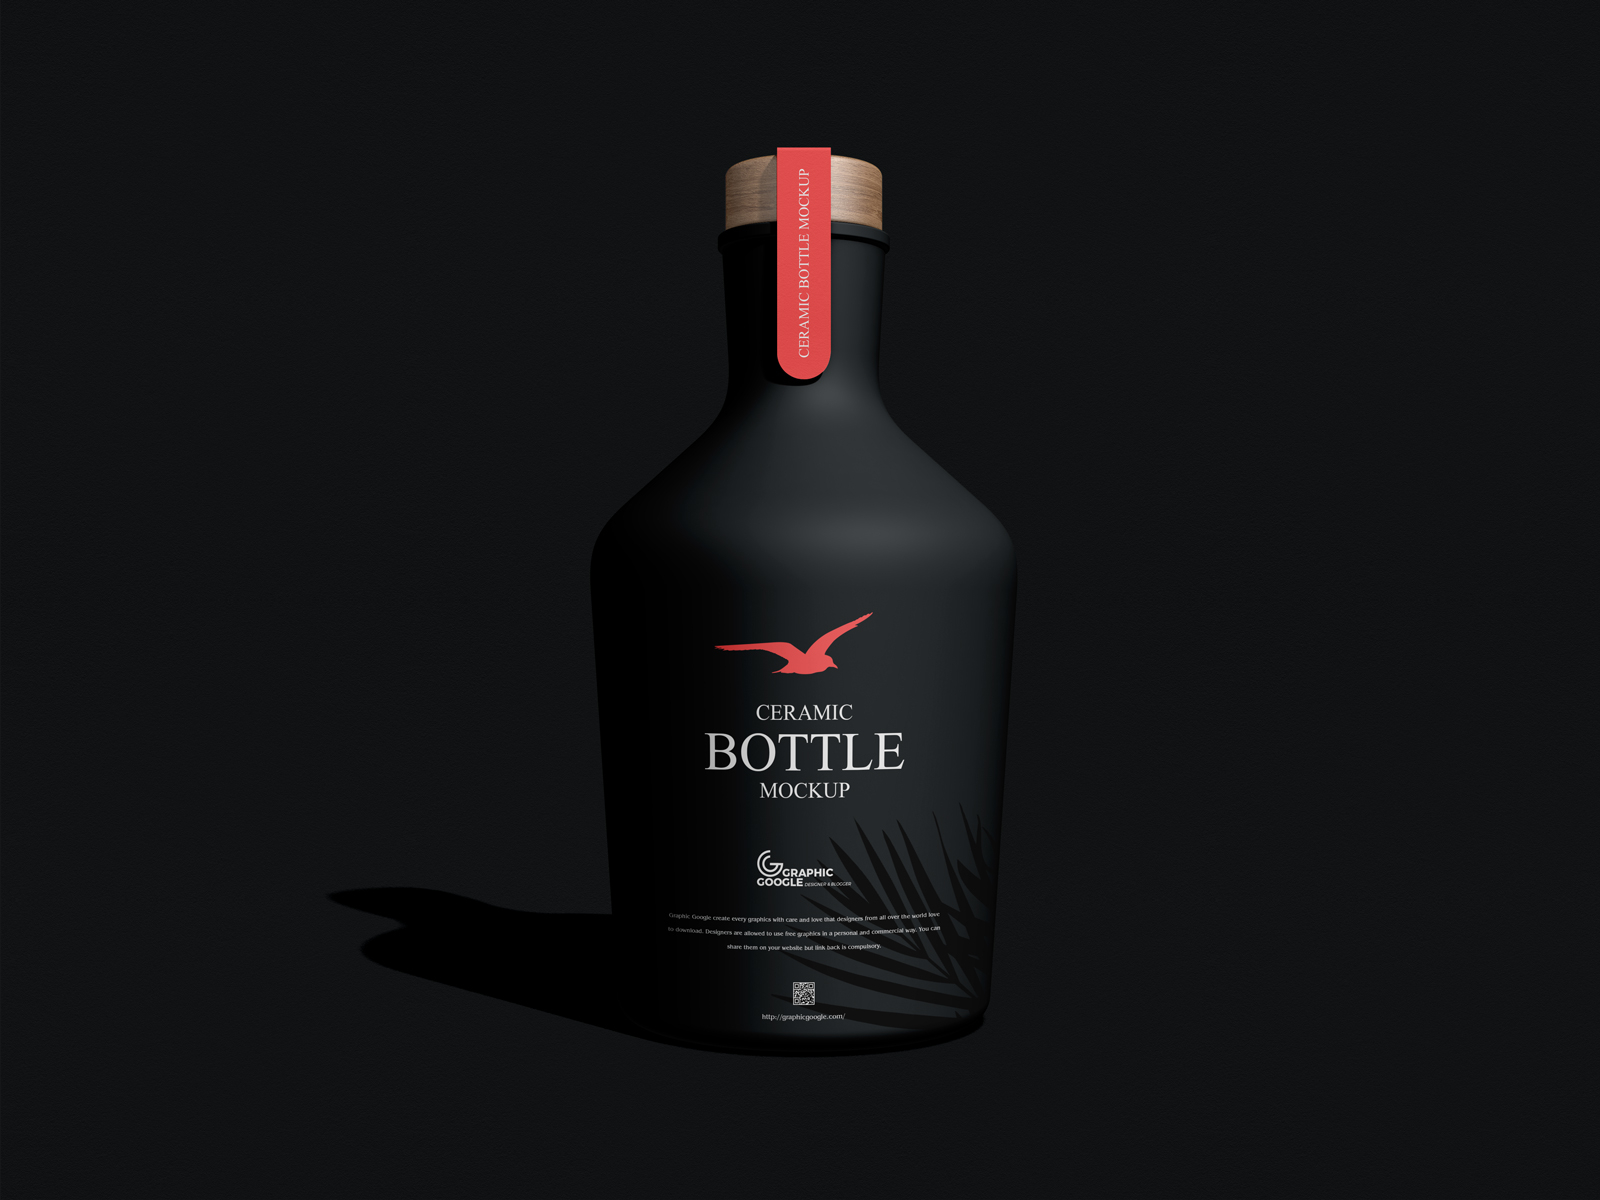 Download Free Ceramic Bottle Mockup by Graphic Google on Dribbble